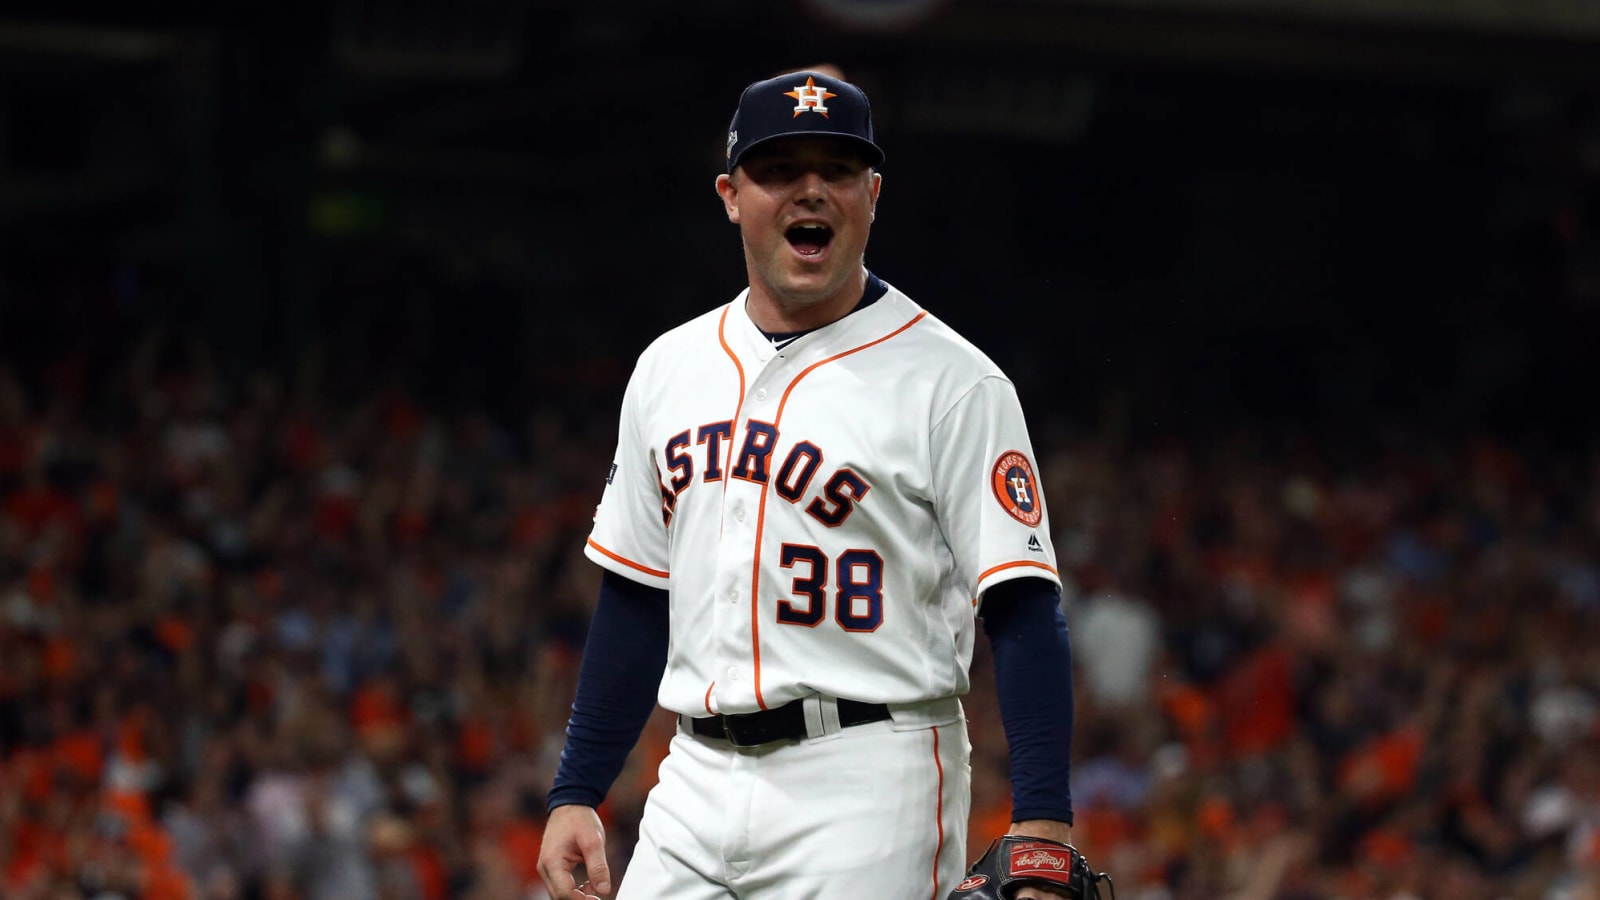 Former Astros pitcher Joe Smith announces RETIREMENT after 16 MLB seasons